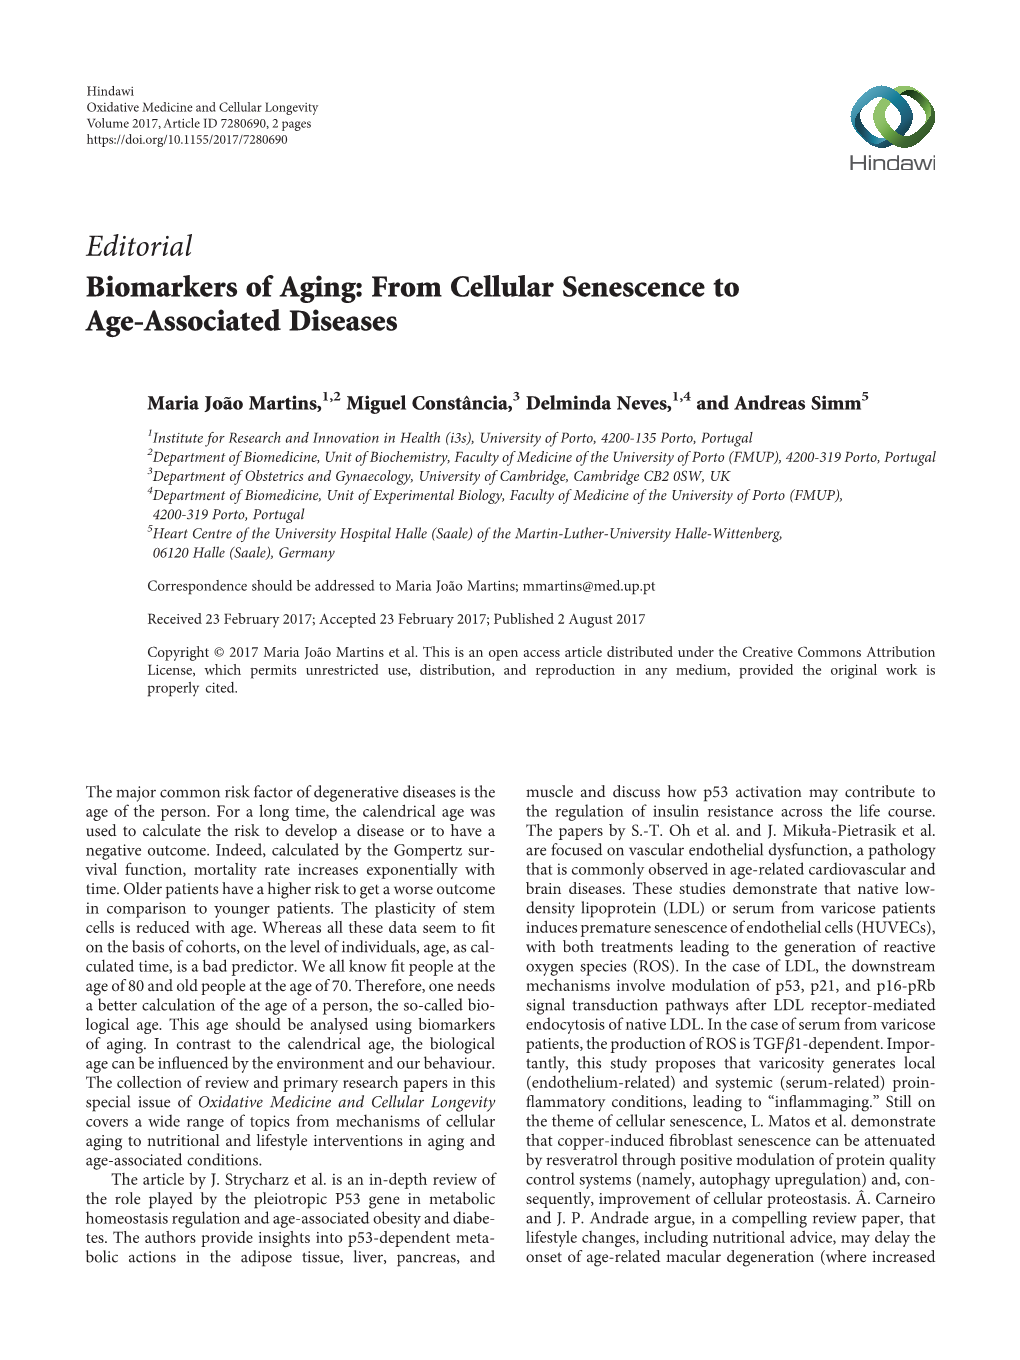 Editorial Biomarkers of Aging: from Cellular Senescence to Age-Associated Diseases